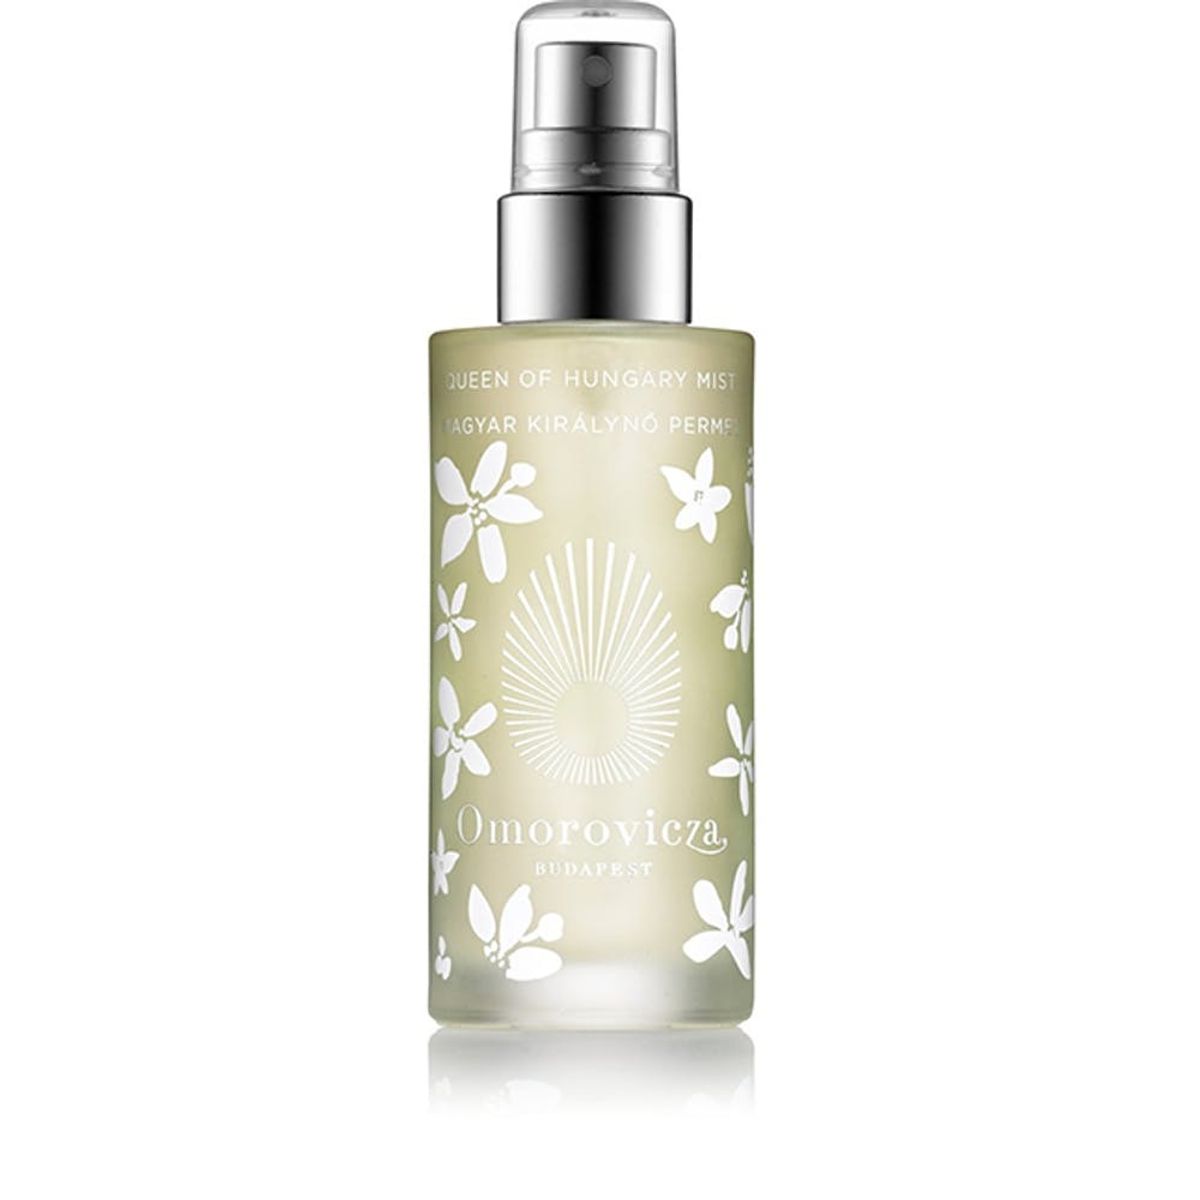 16 Face Mists to Stash at Your Desk for a Mid-Day Pick-Me-Up